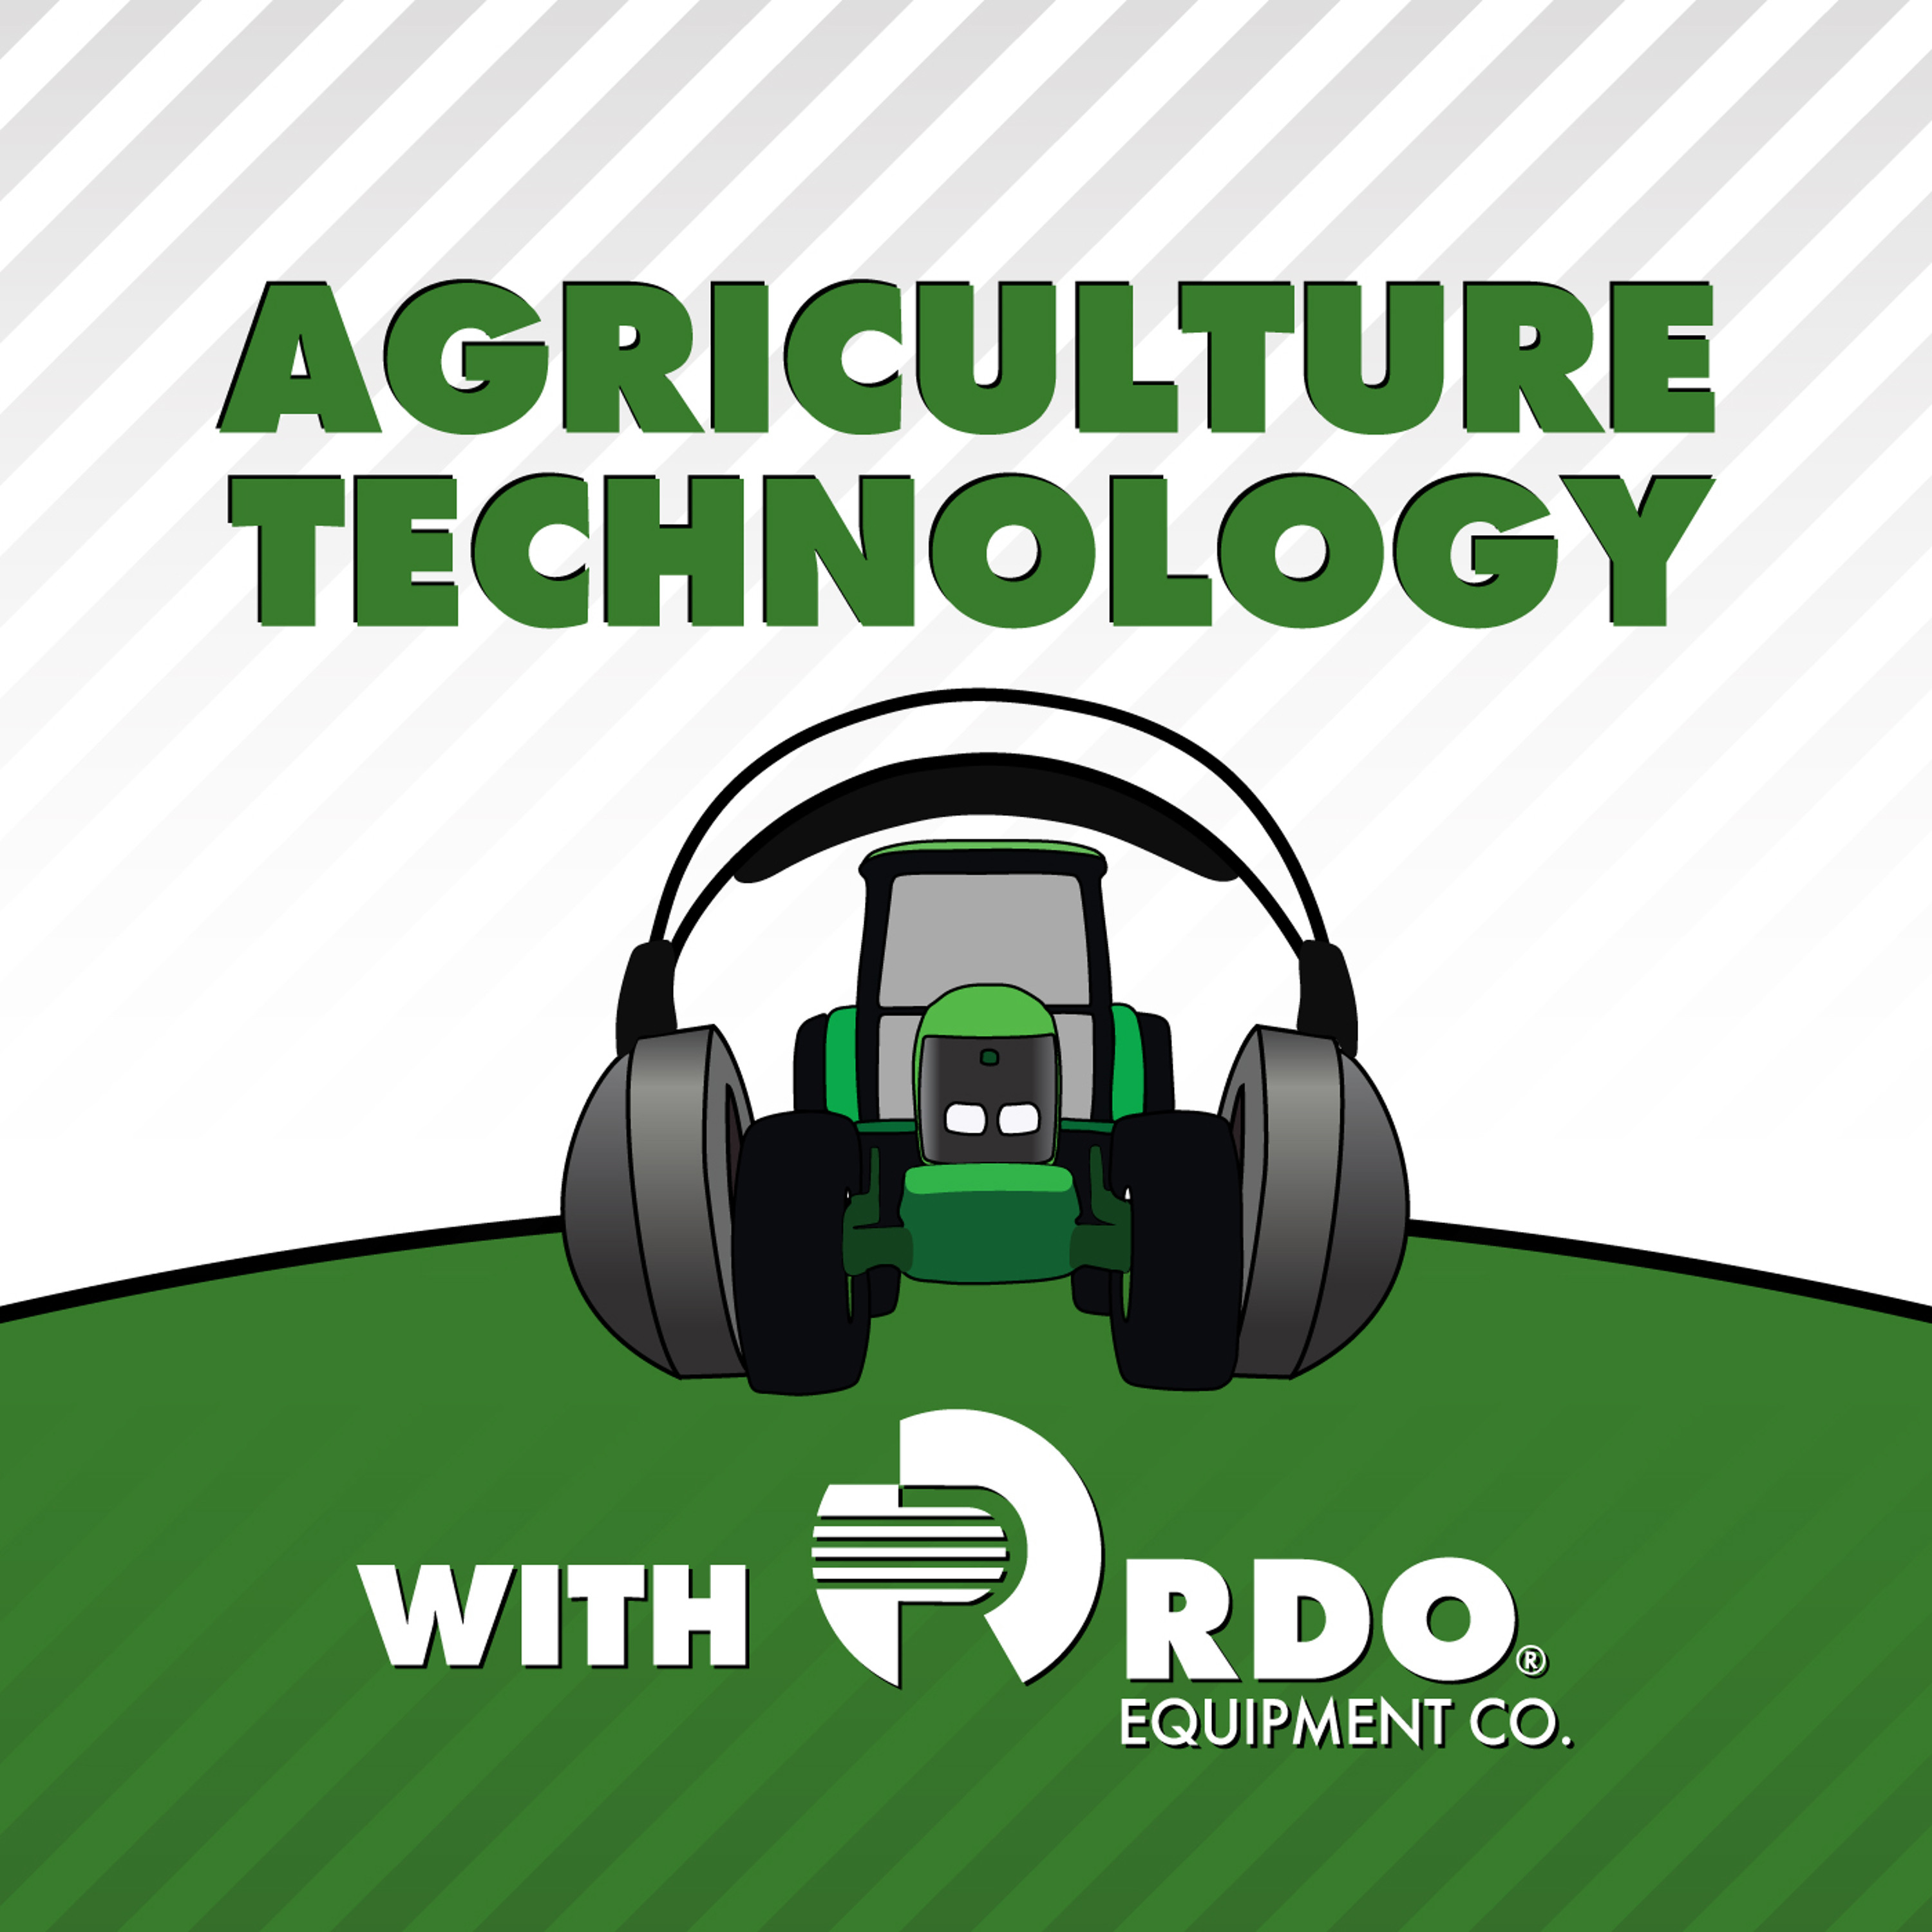 Ep. 41 RDO As Guests On The Precision Farming Dealer Podcast